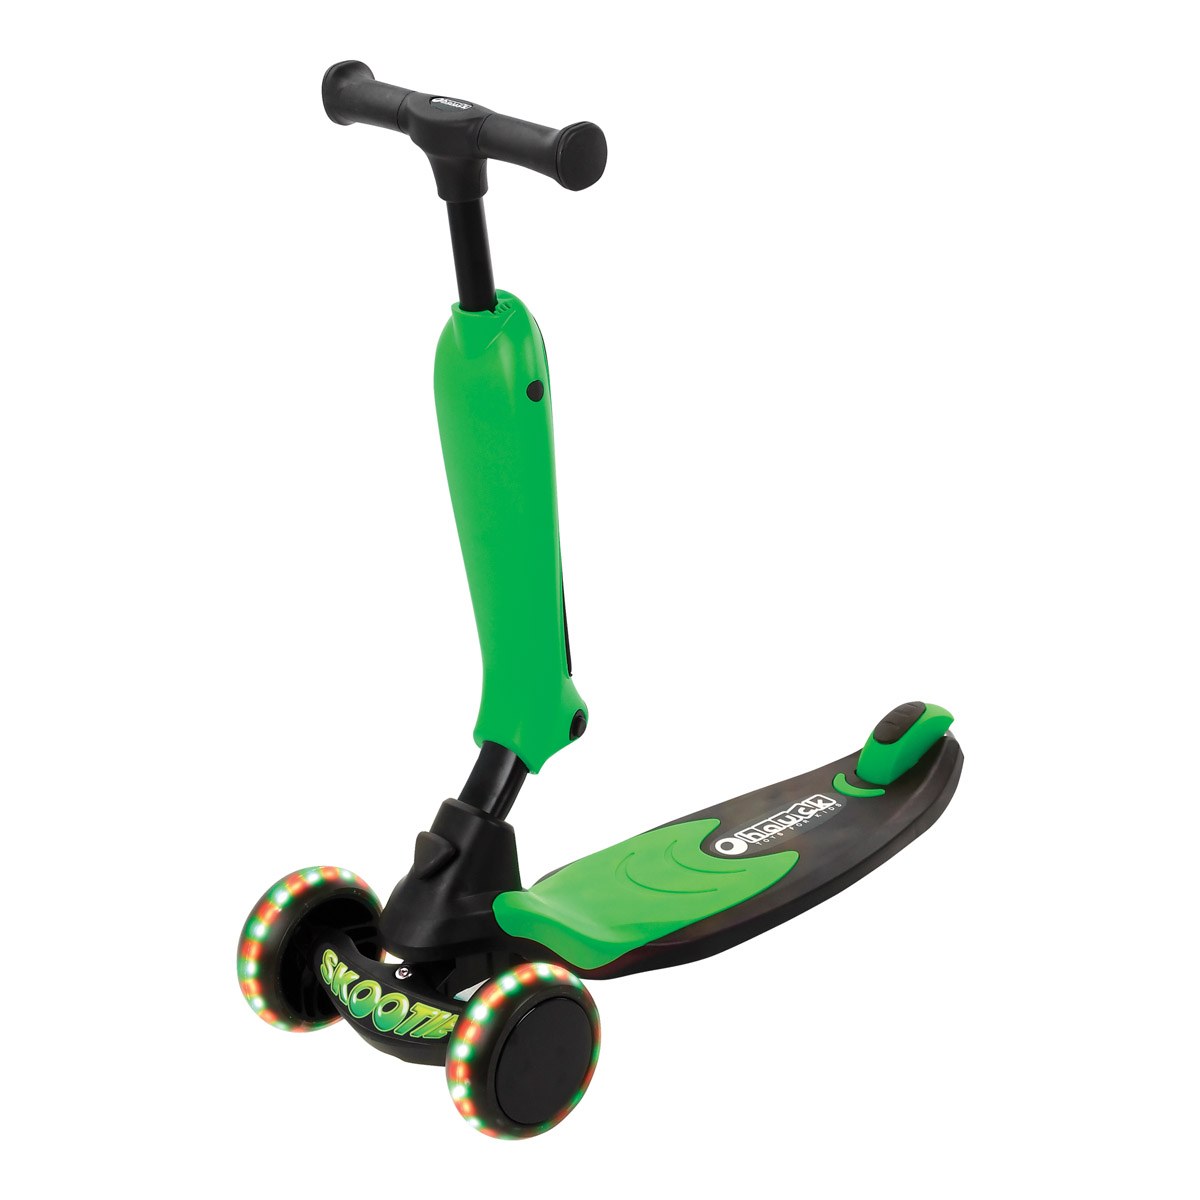 Hauck Skootie 2-in-1 Ride-On and Scooter - Neon Green